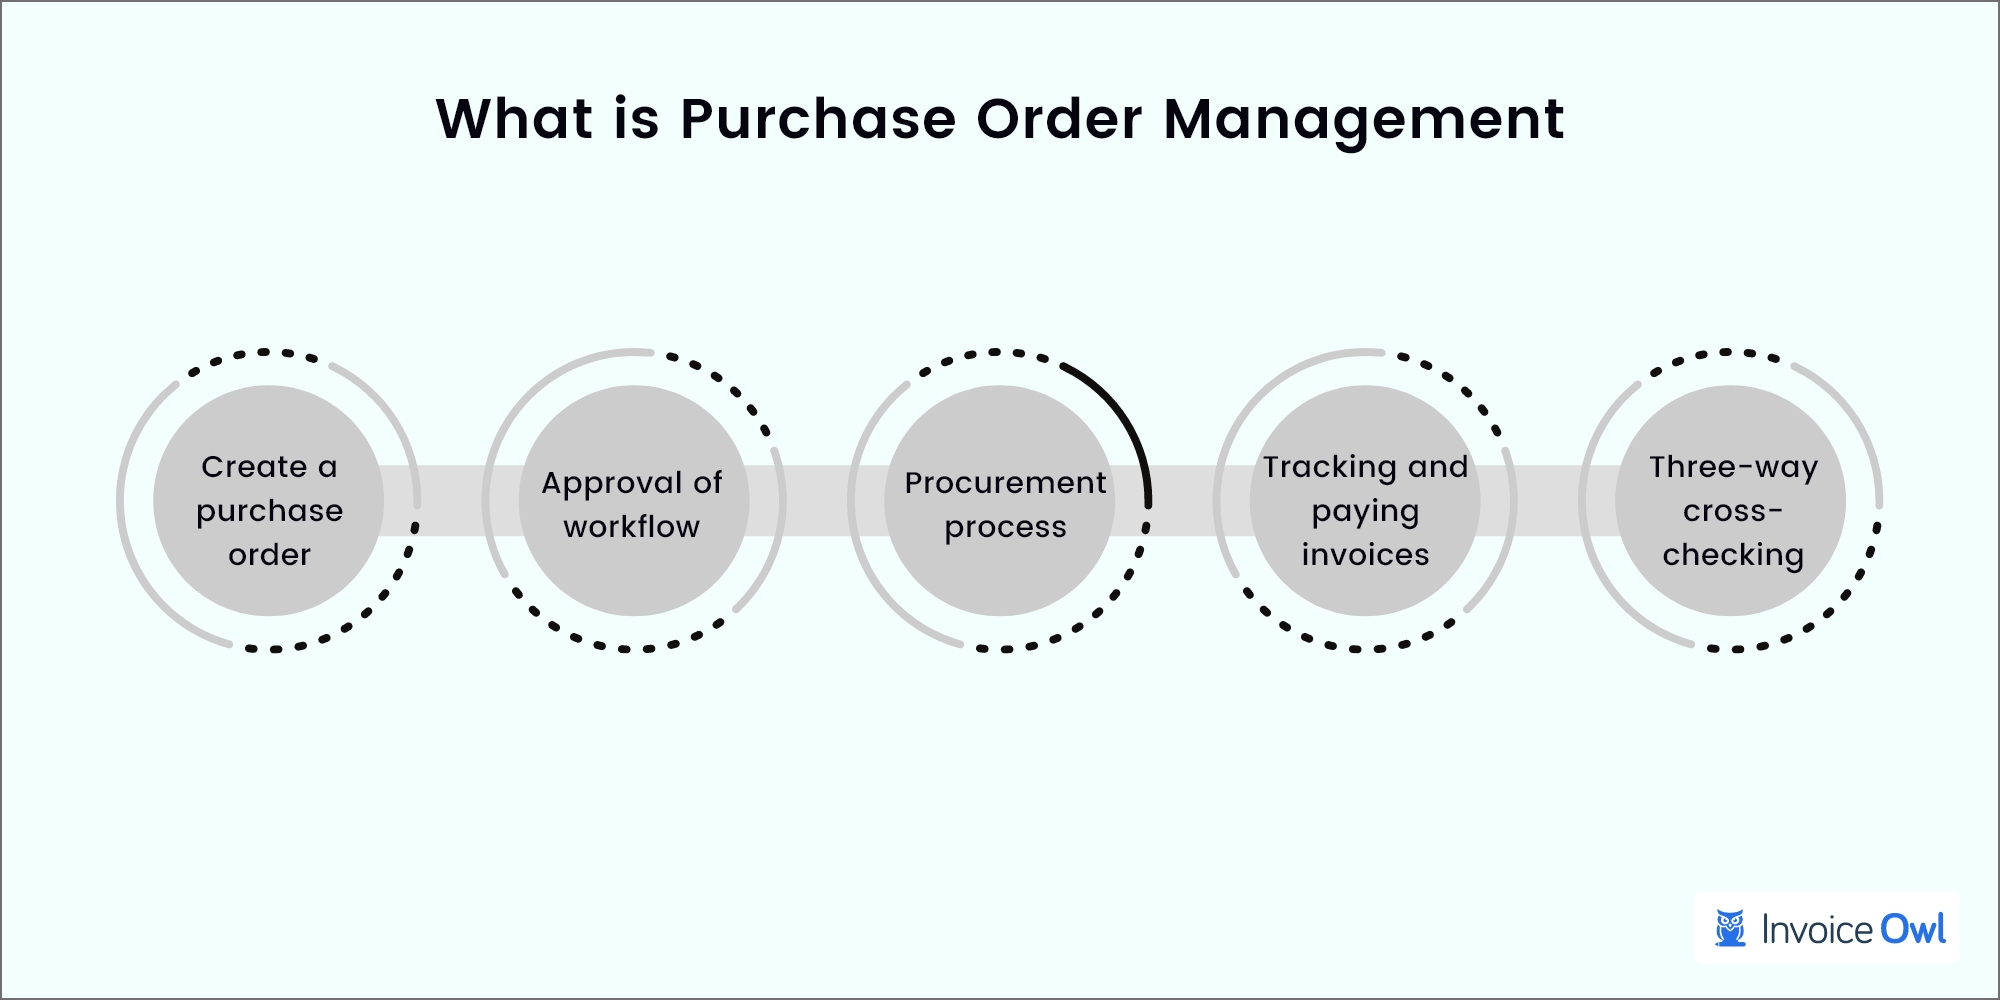 steps in purchase order management process